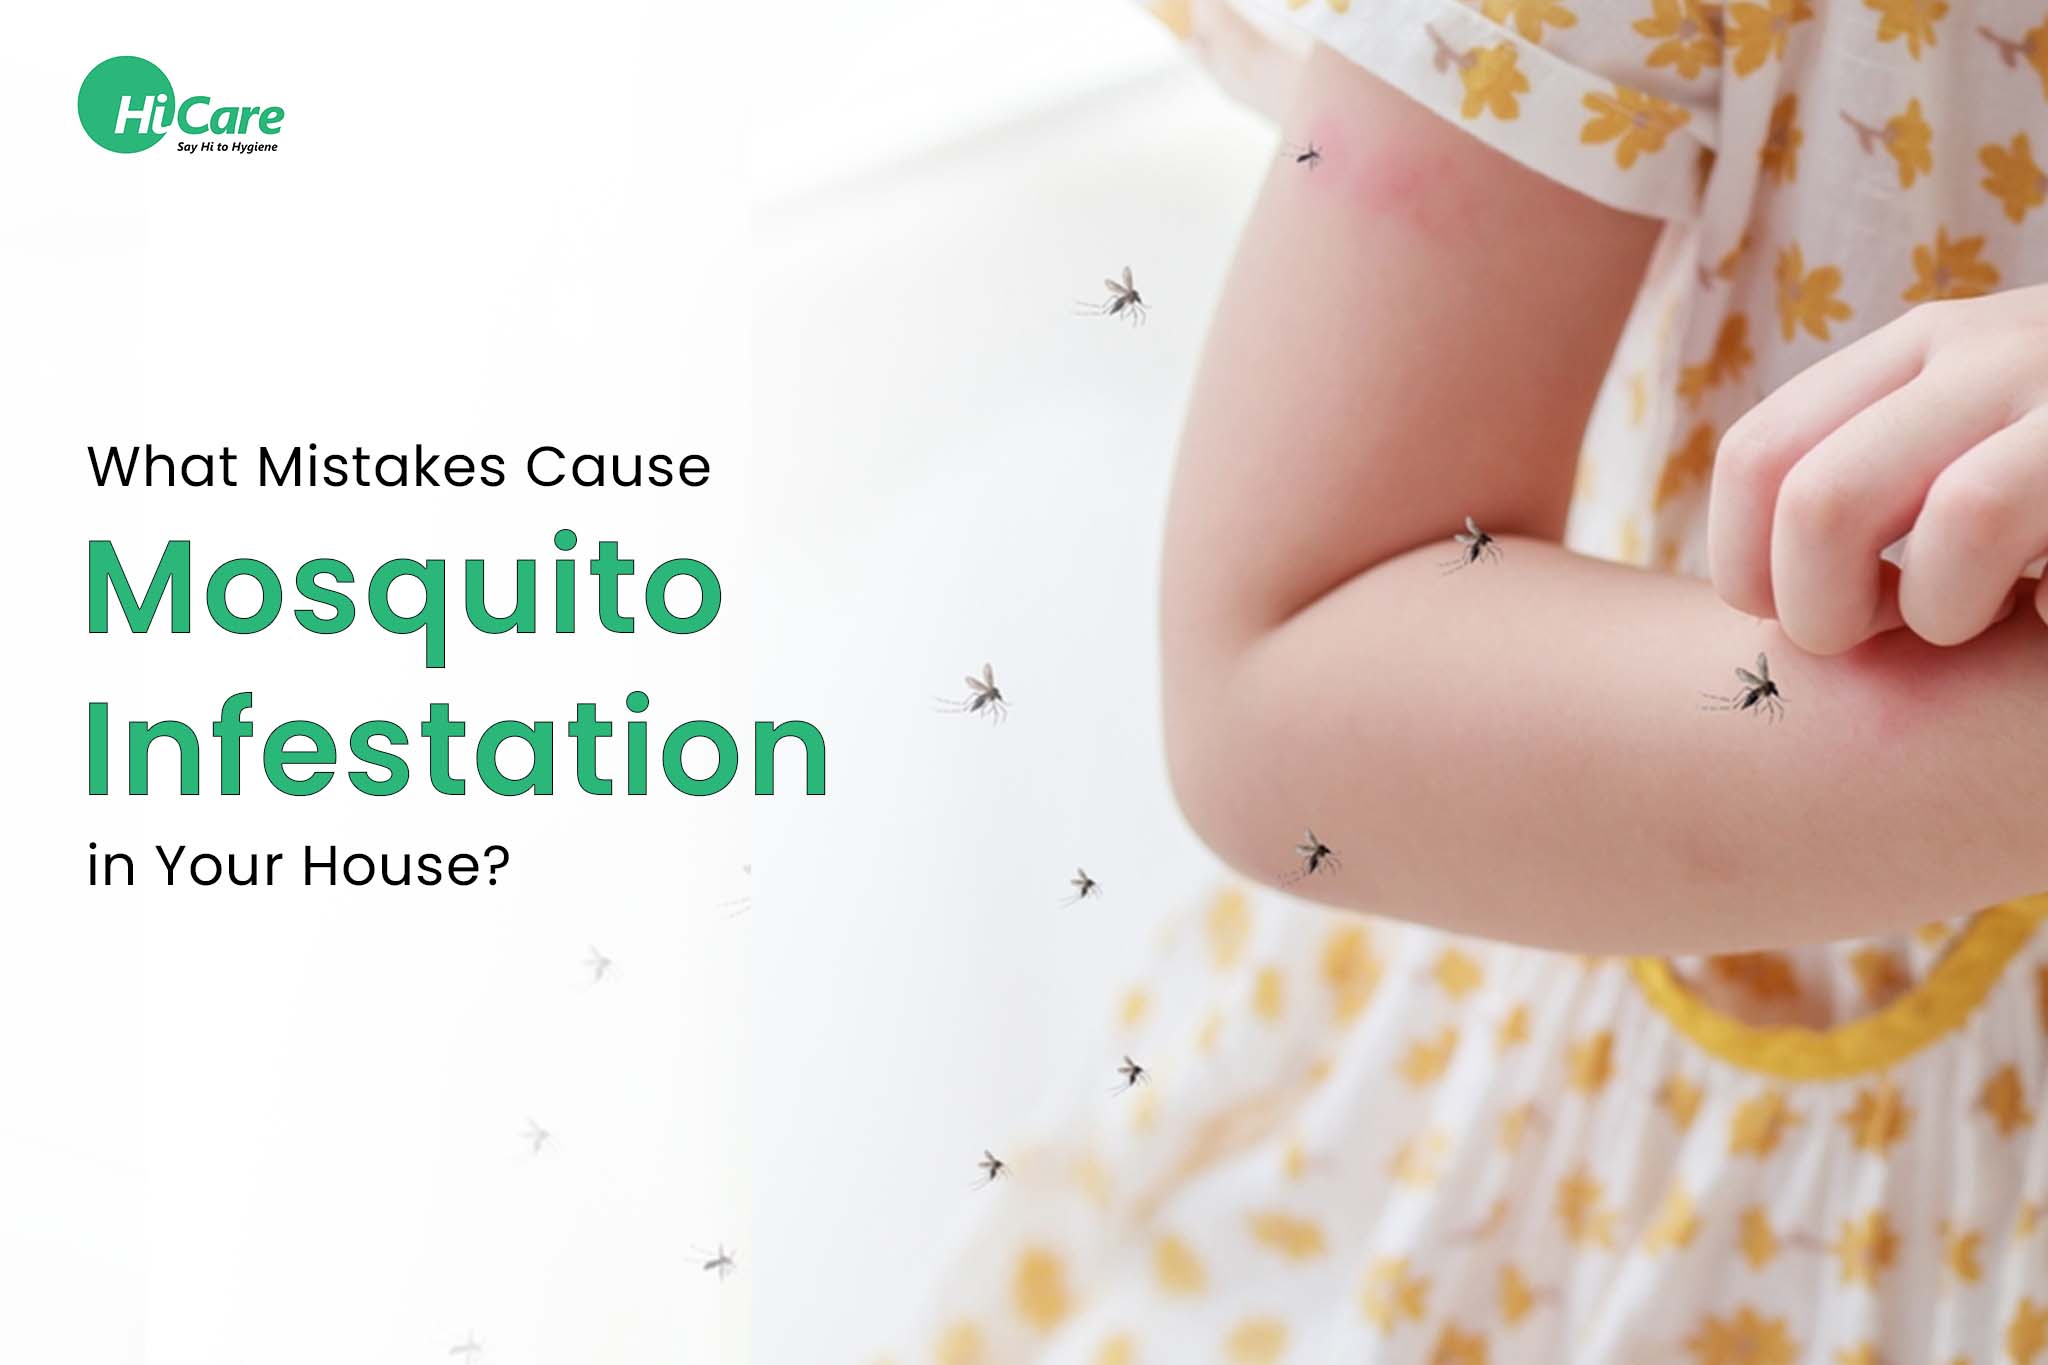 common mistakes that cause mosquito infestation in your house